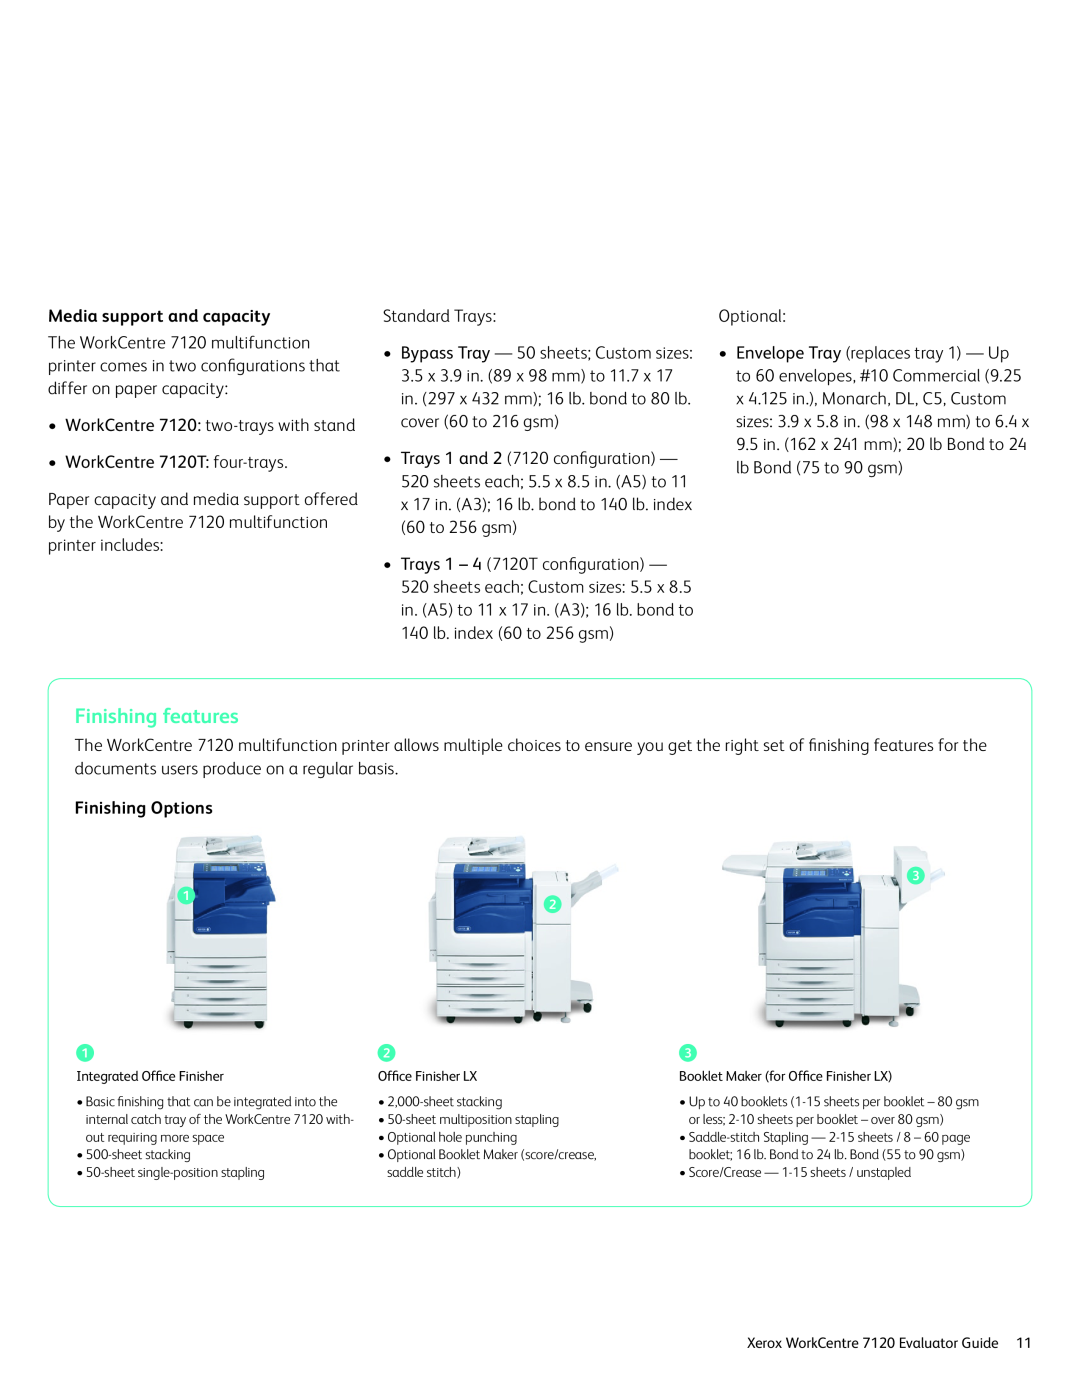 Xerox 7120 manual Finishing features, Media support and capacity, Finishing Options 